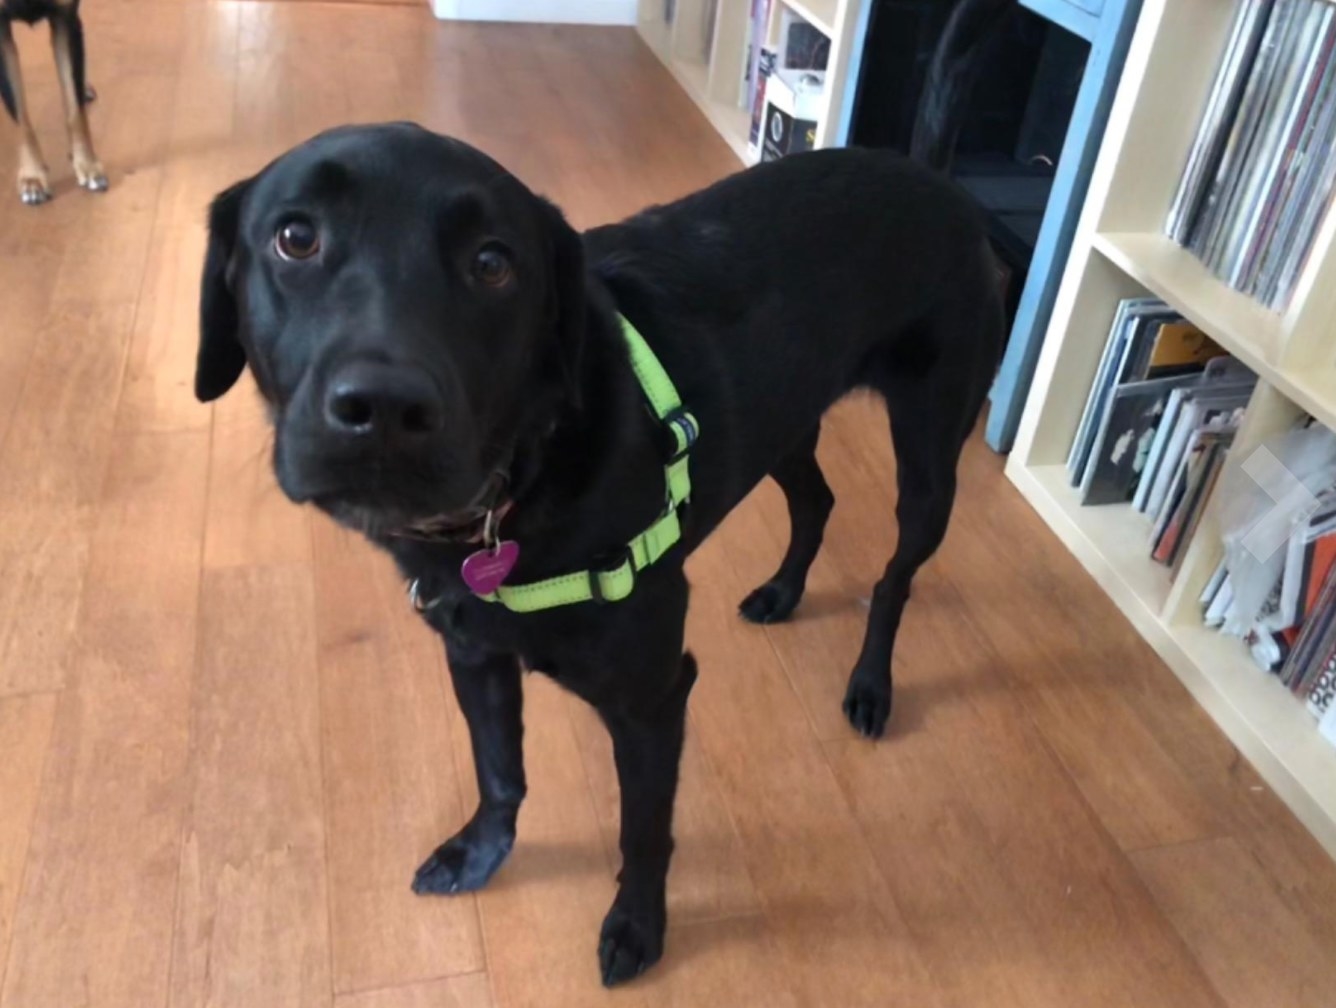 The dog harness in apple